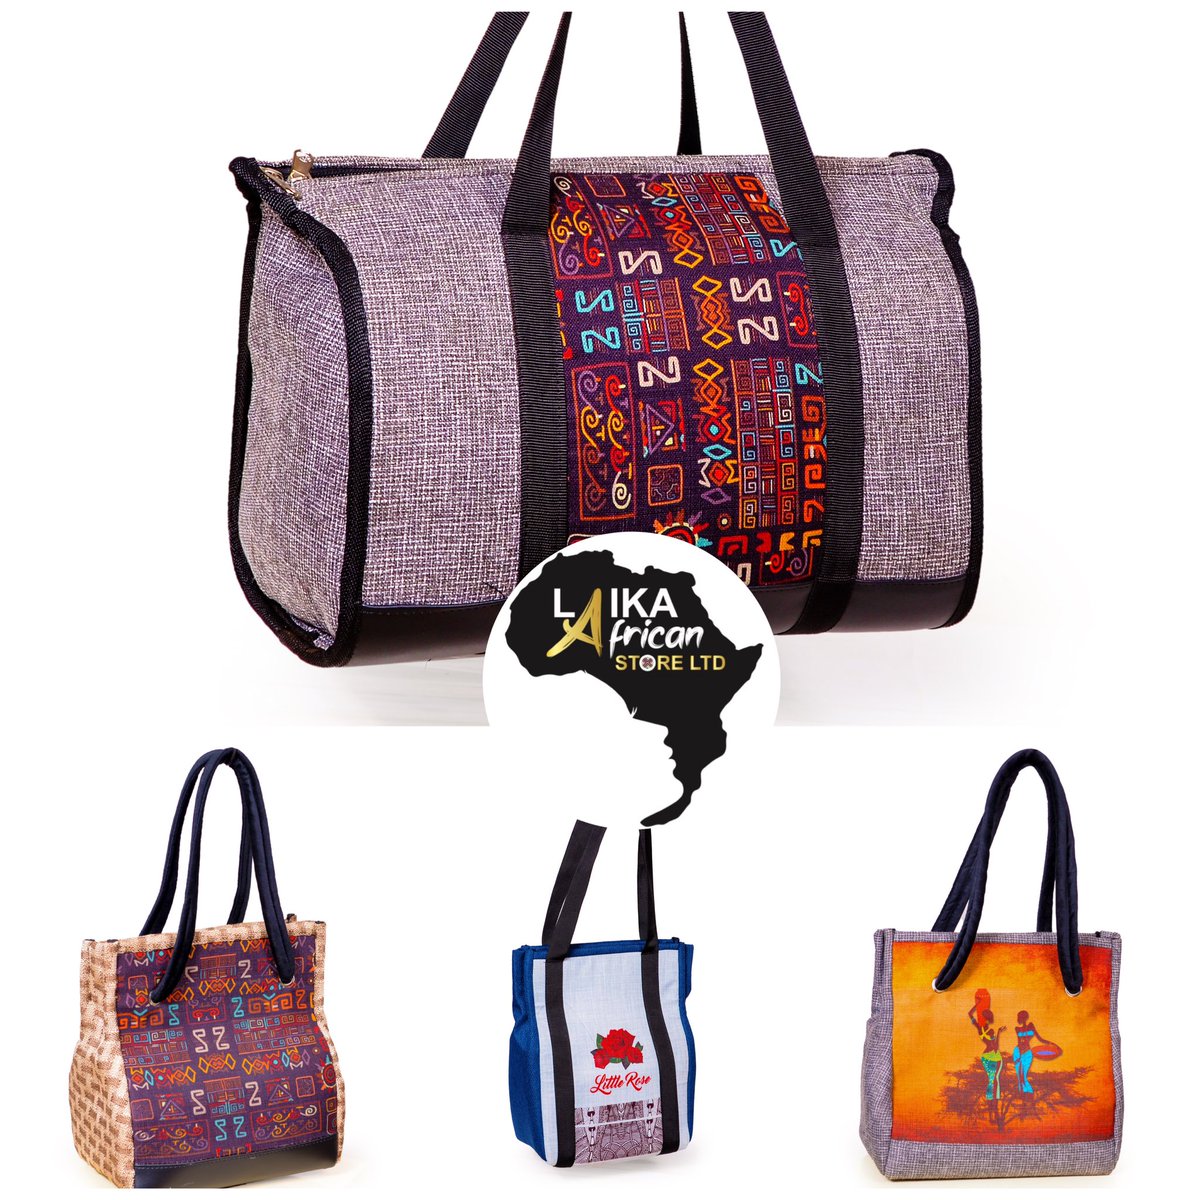 Immerse yourself in a world of vibrant colors, bold patterns, and unique designs that tell a story. Quality meets culture in every stitch, making these bags a must-have fashion statement. Elevate your fashion game with our African customized bags! #AfricanStyle #UniqueFashion